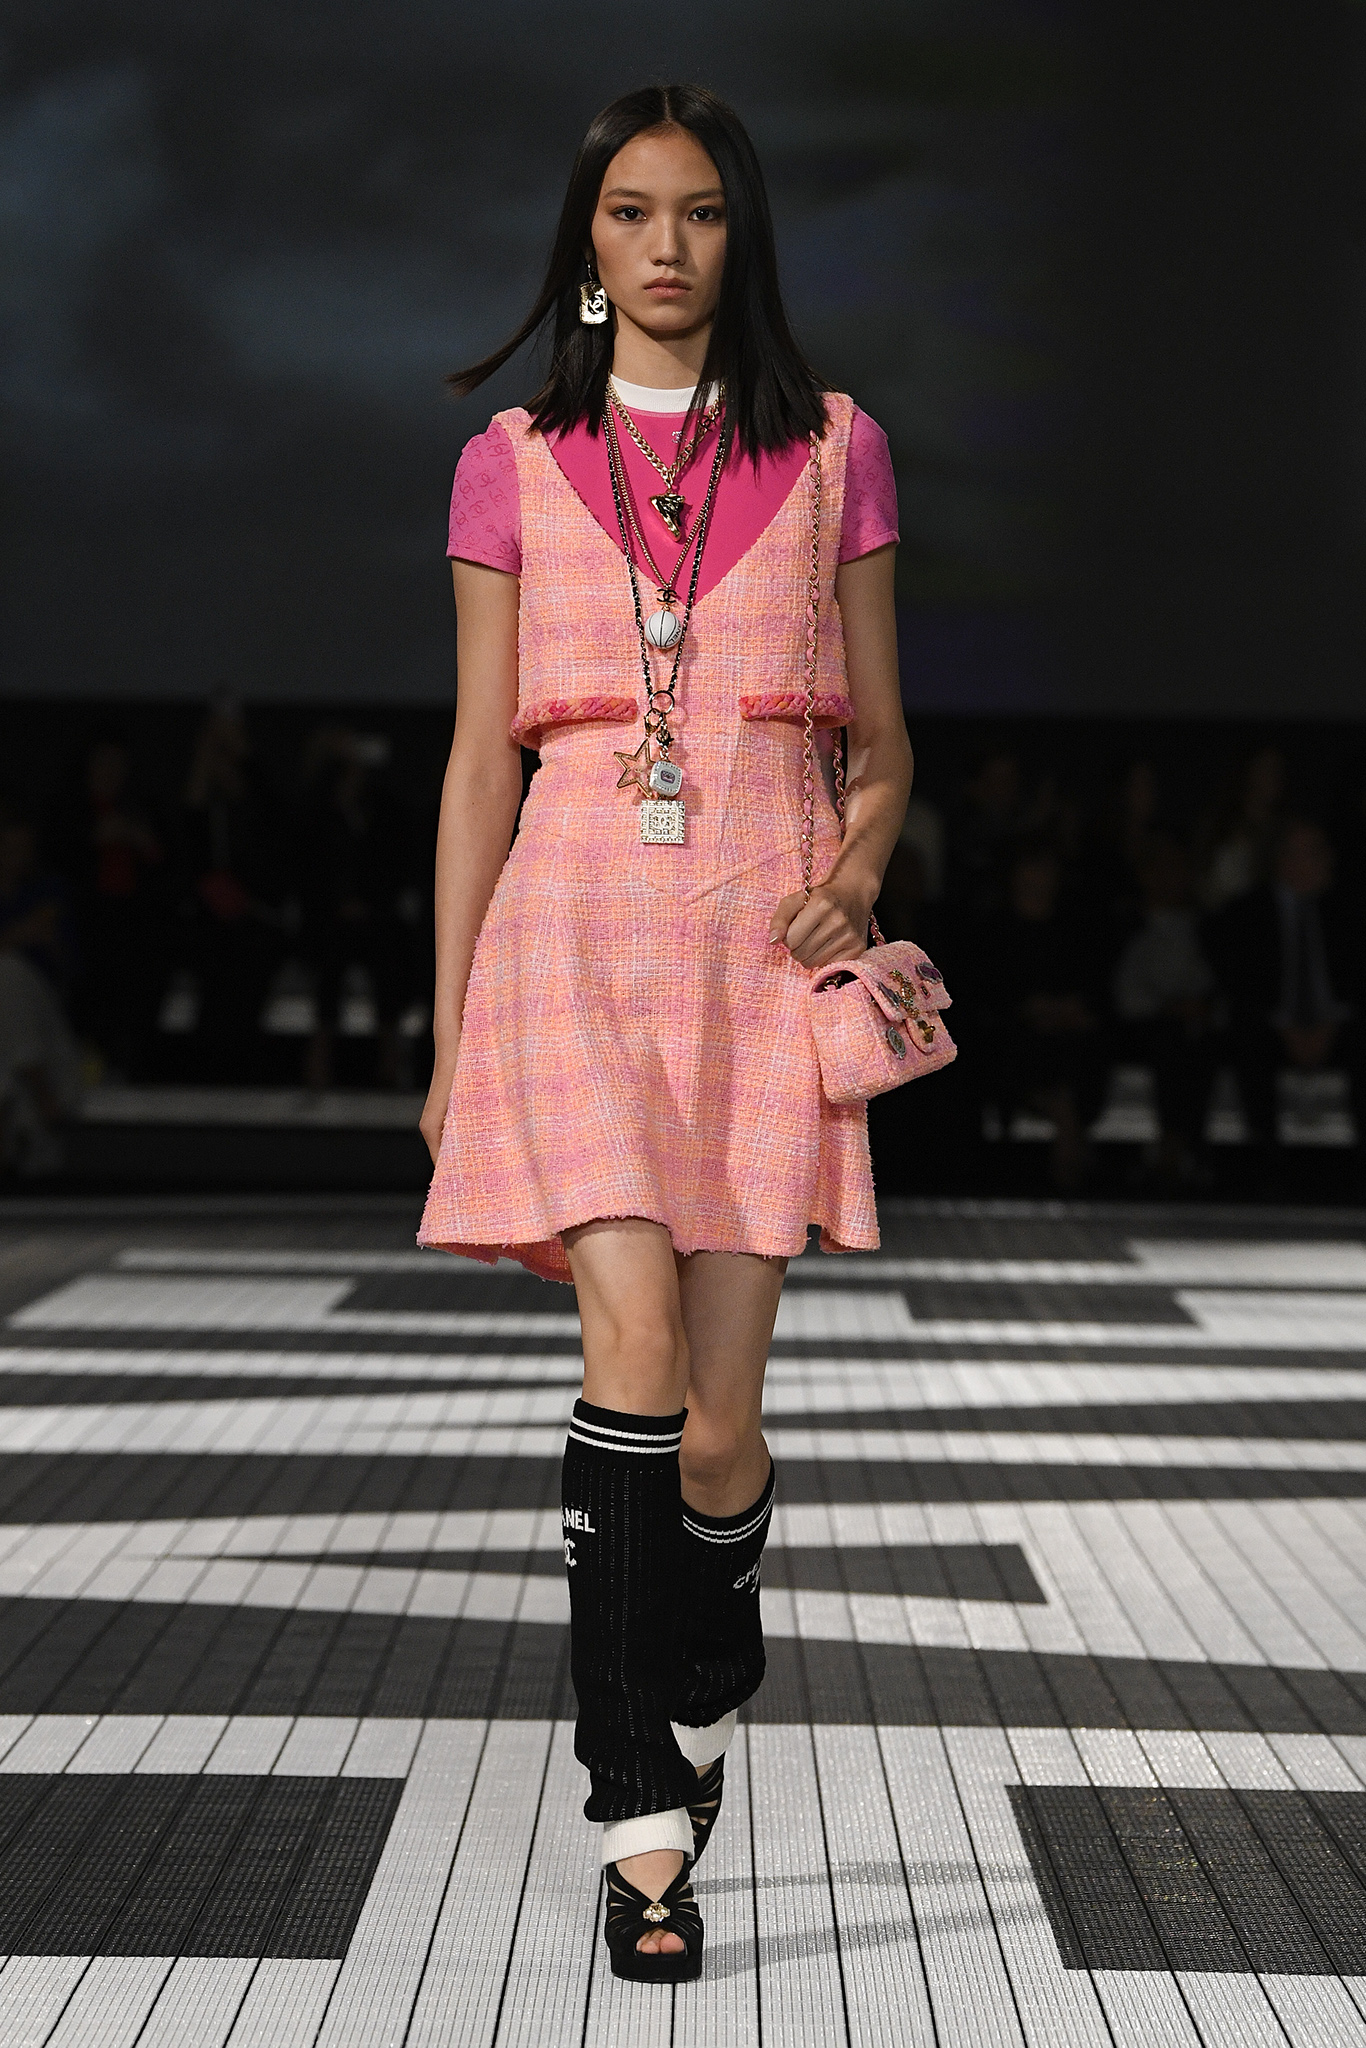 Chanel's New Cruise 2023/24 Collection Has the Perfect Outfit for